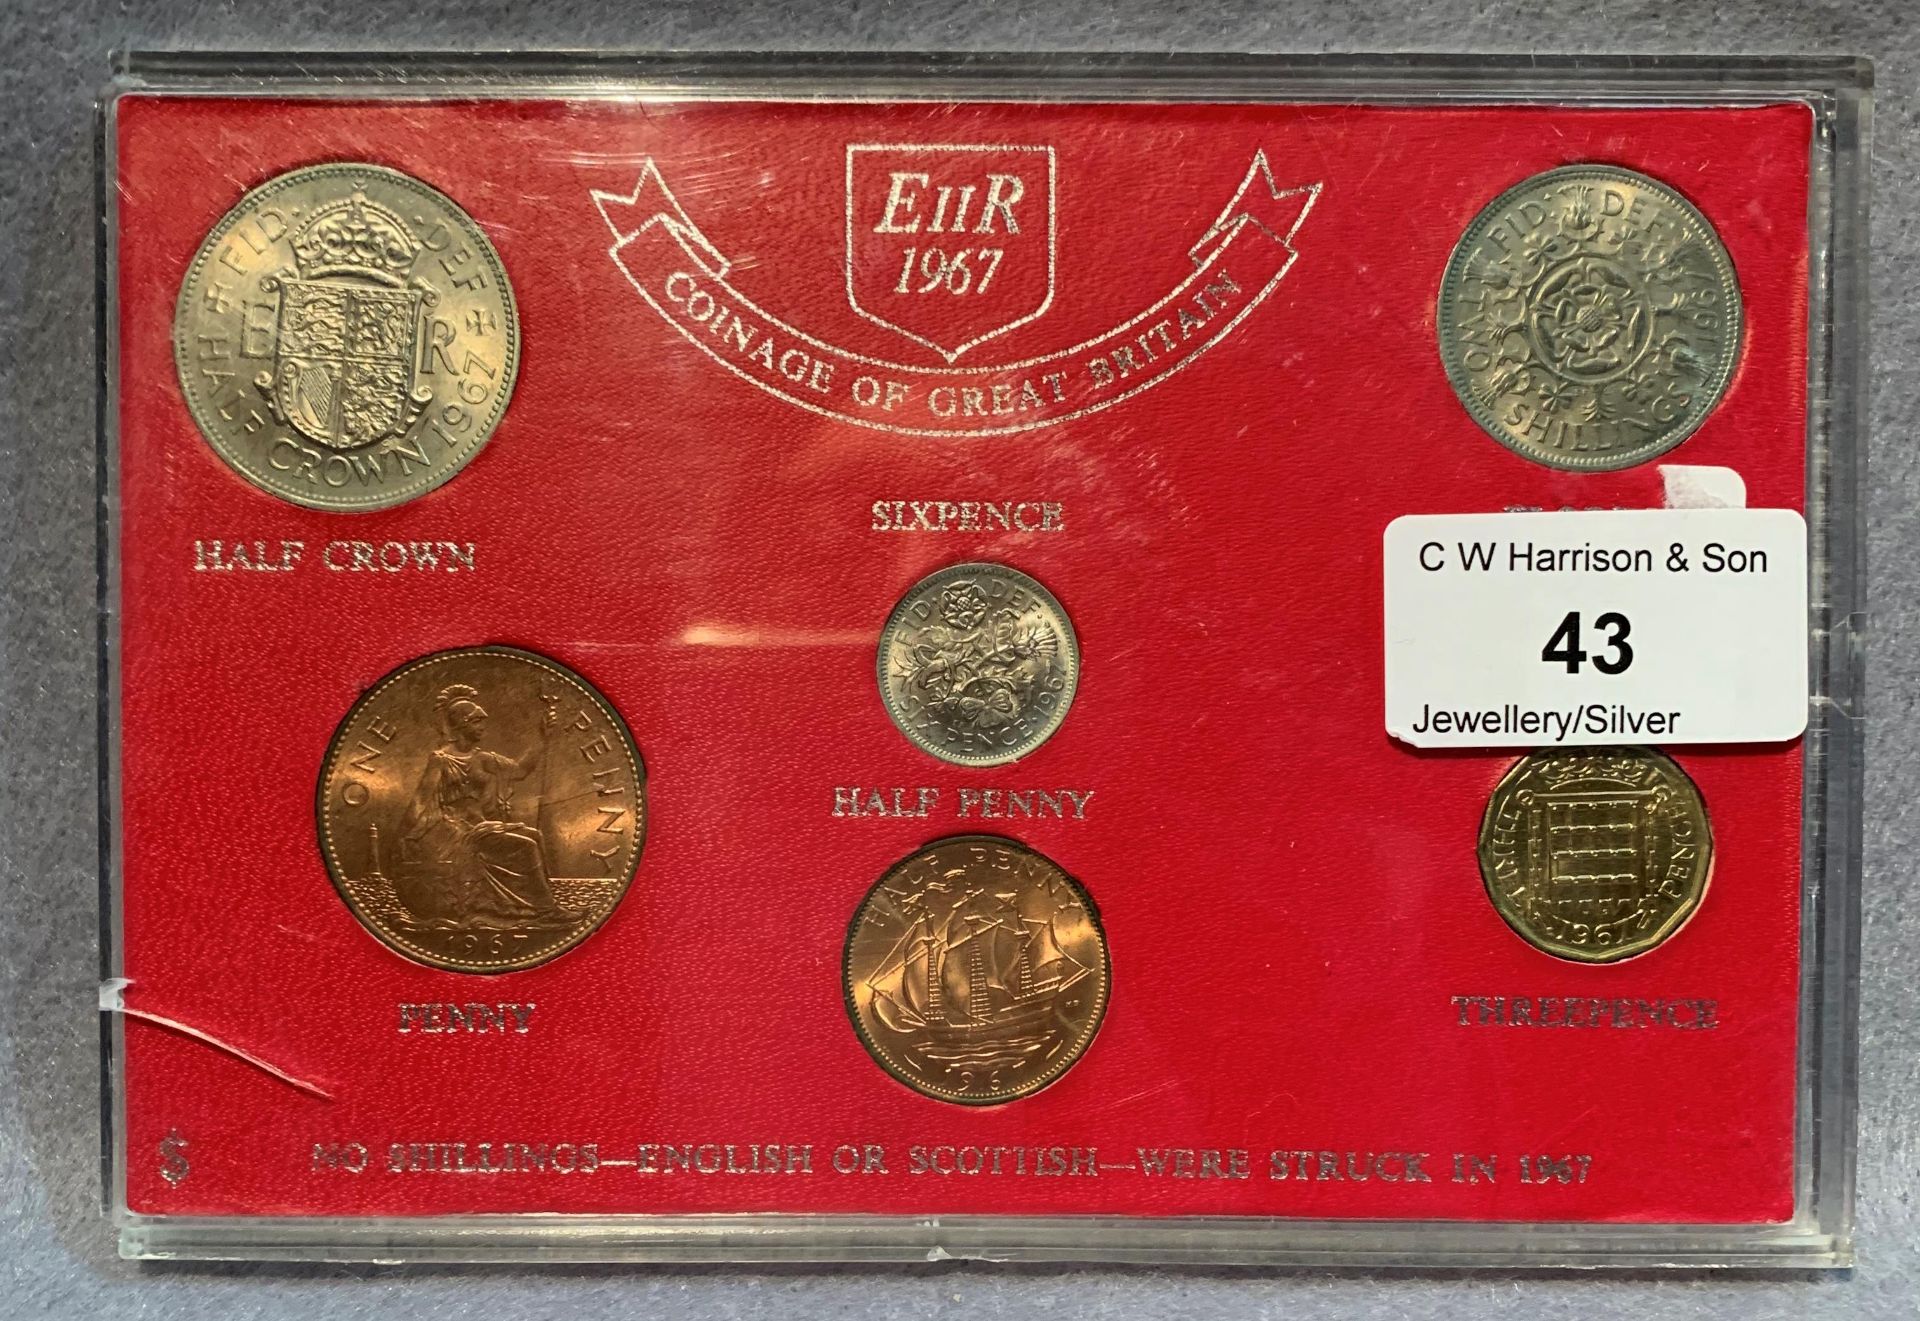 An EIIR 1967 Coinage of Great Britain set in case